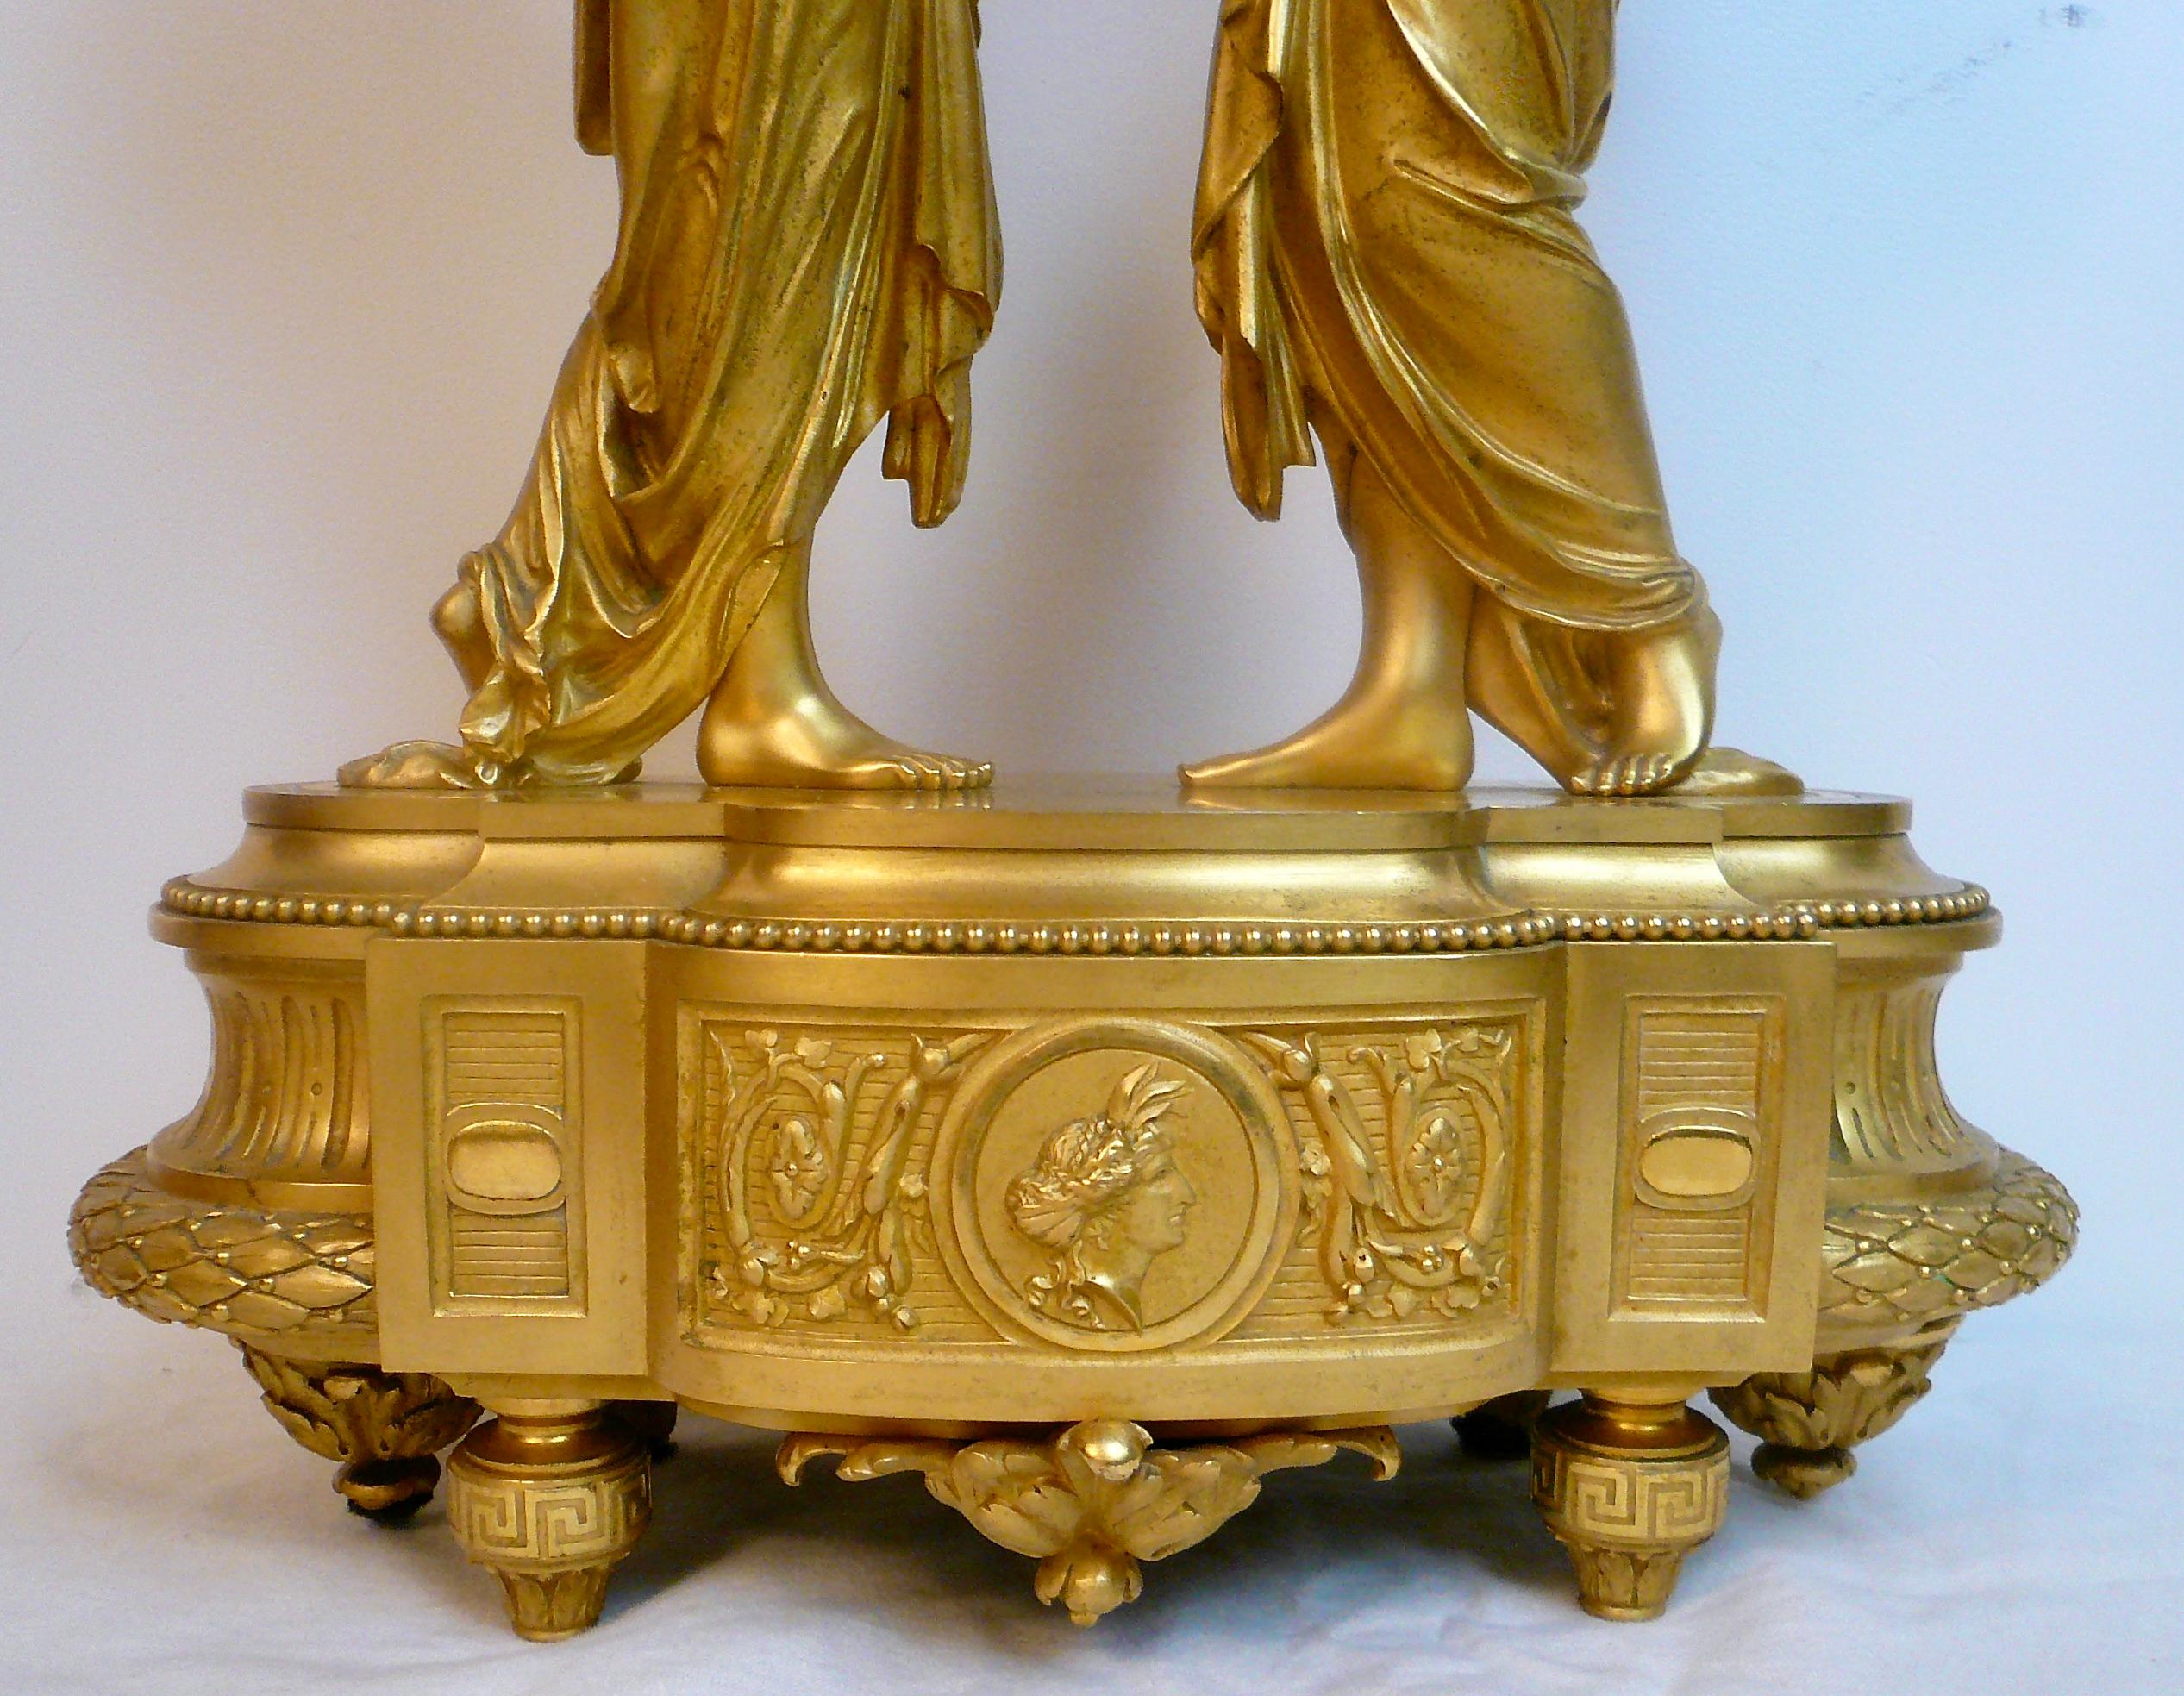 Louis XVI Neo-Classical Style Figural Ormolu Clock by Charpentier & Cie For Sale 6